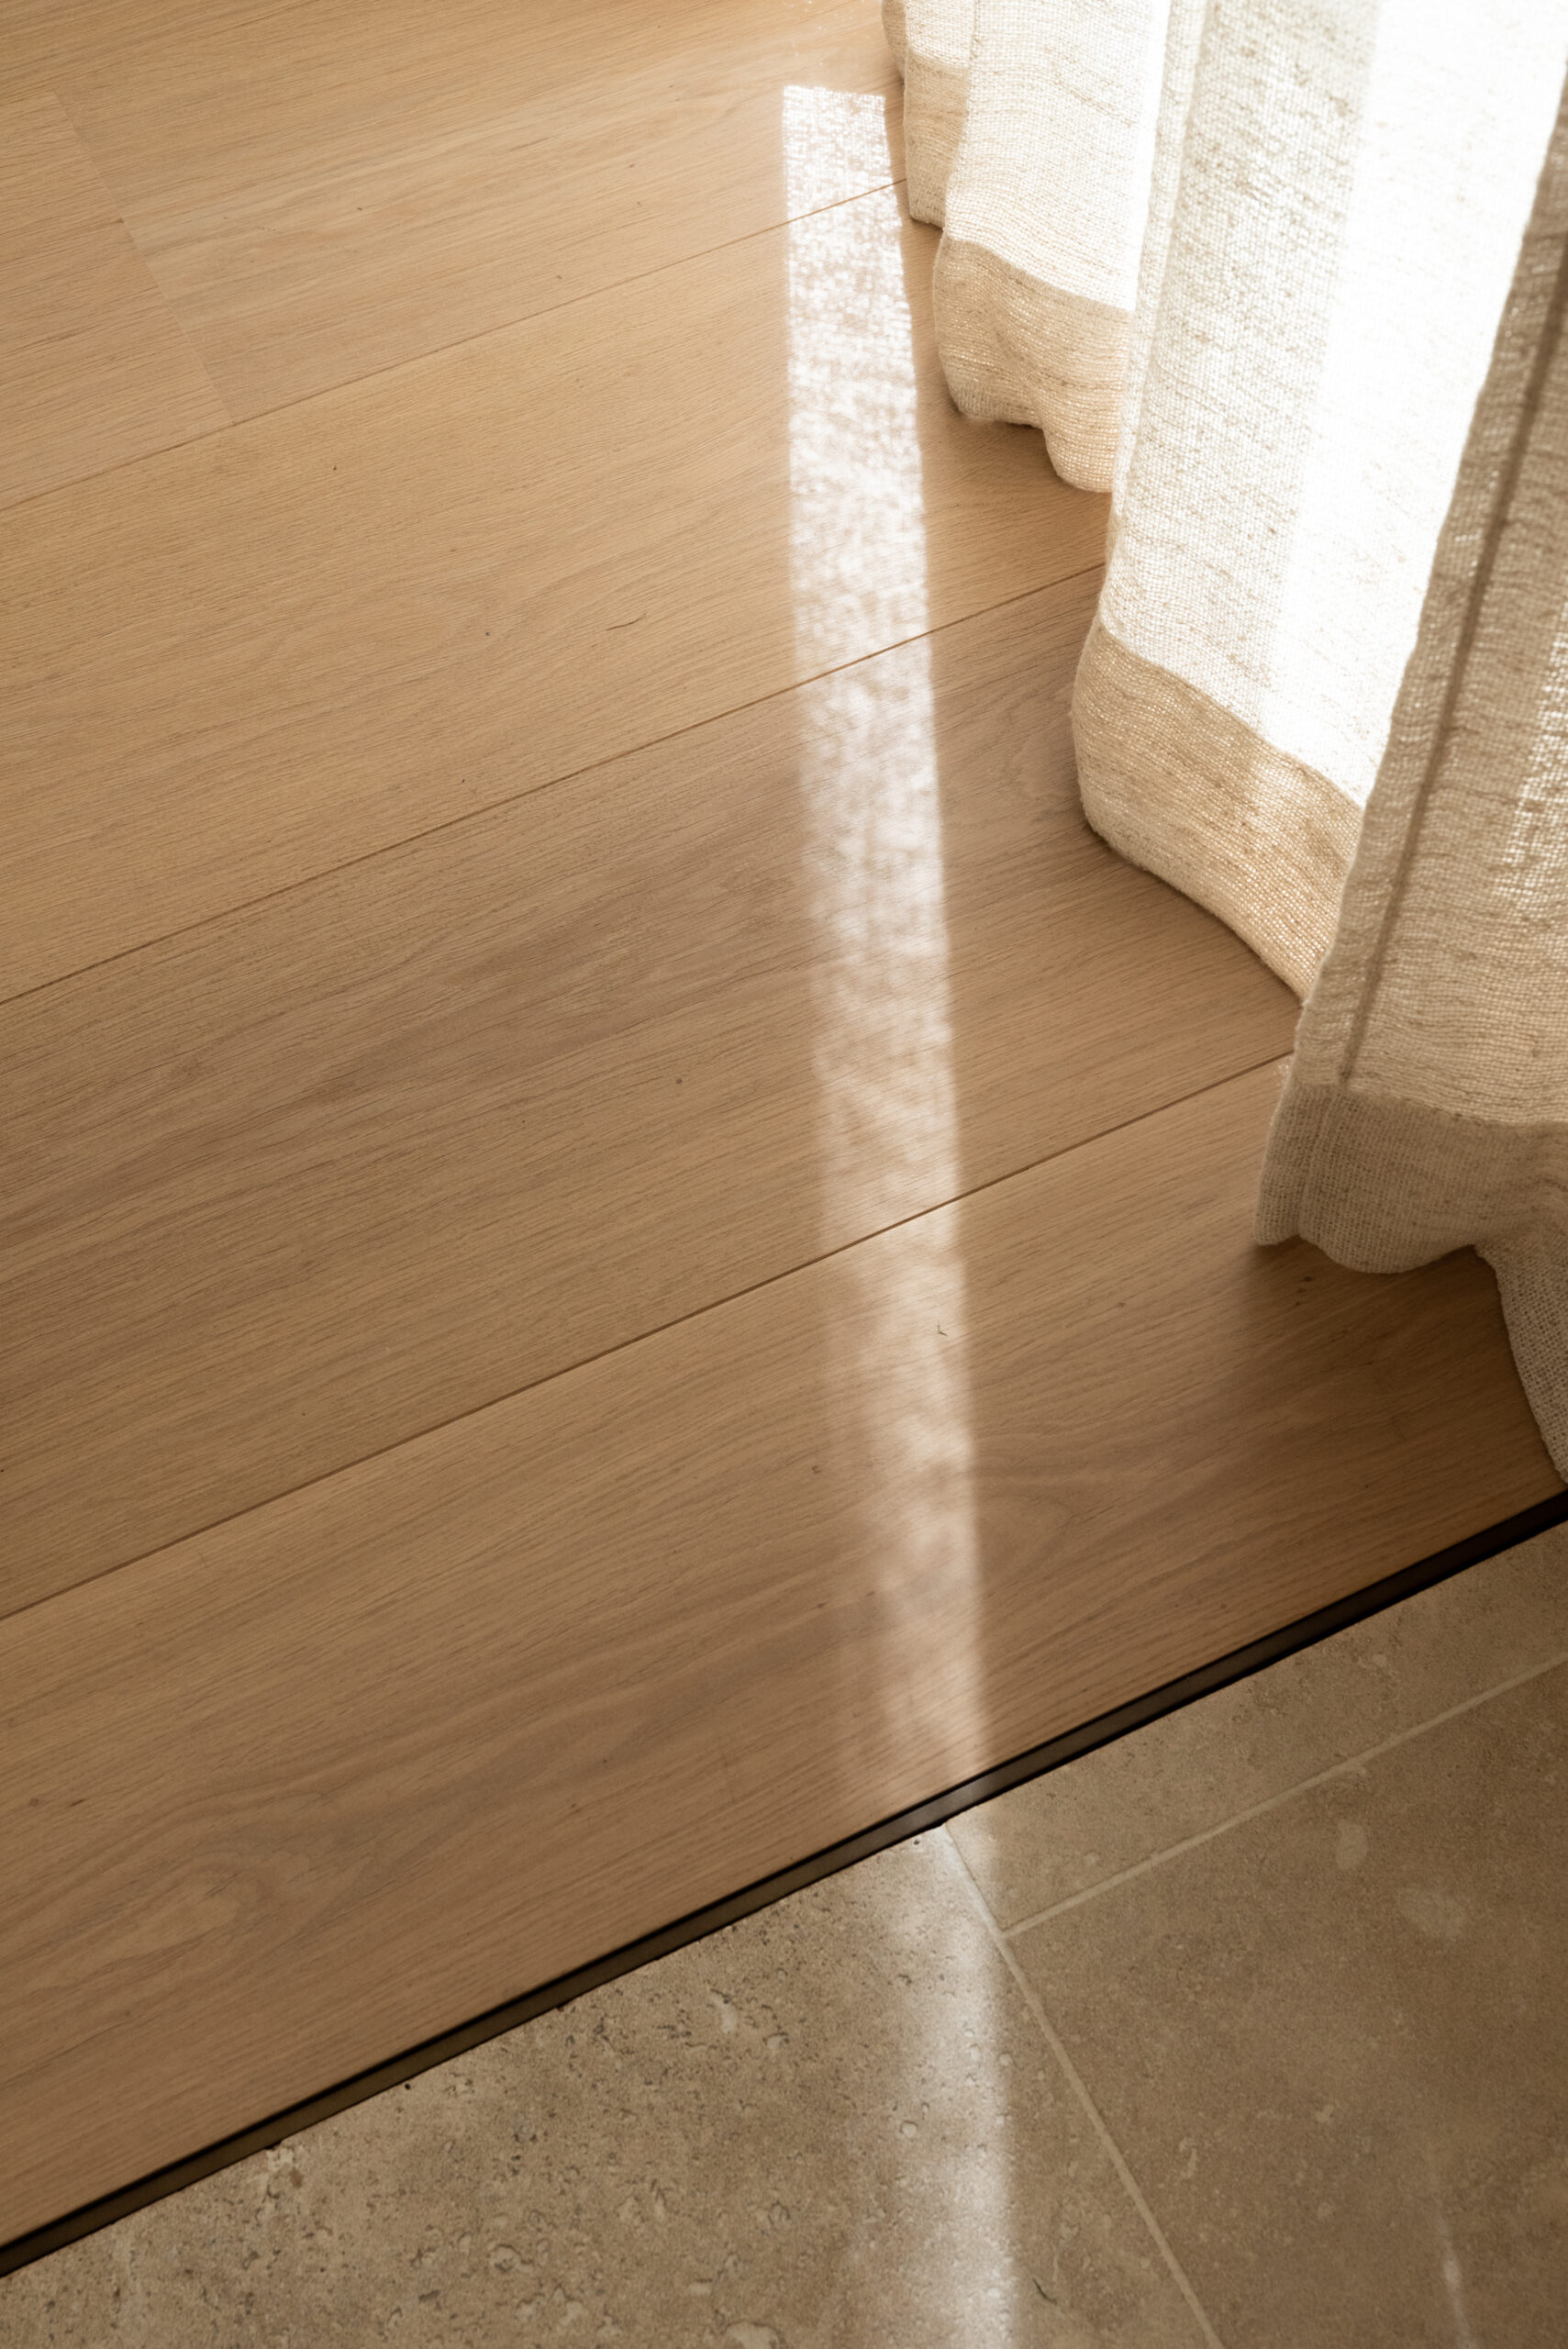 Warm sunlight shines on wooden flooring, meeting a curtain's edge and stone tiles. A serene ambiance prevails.